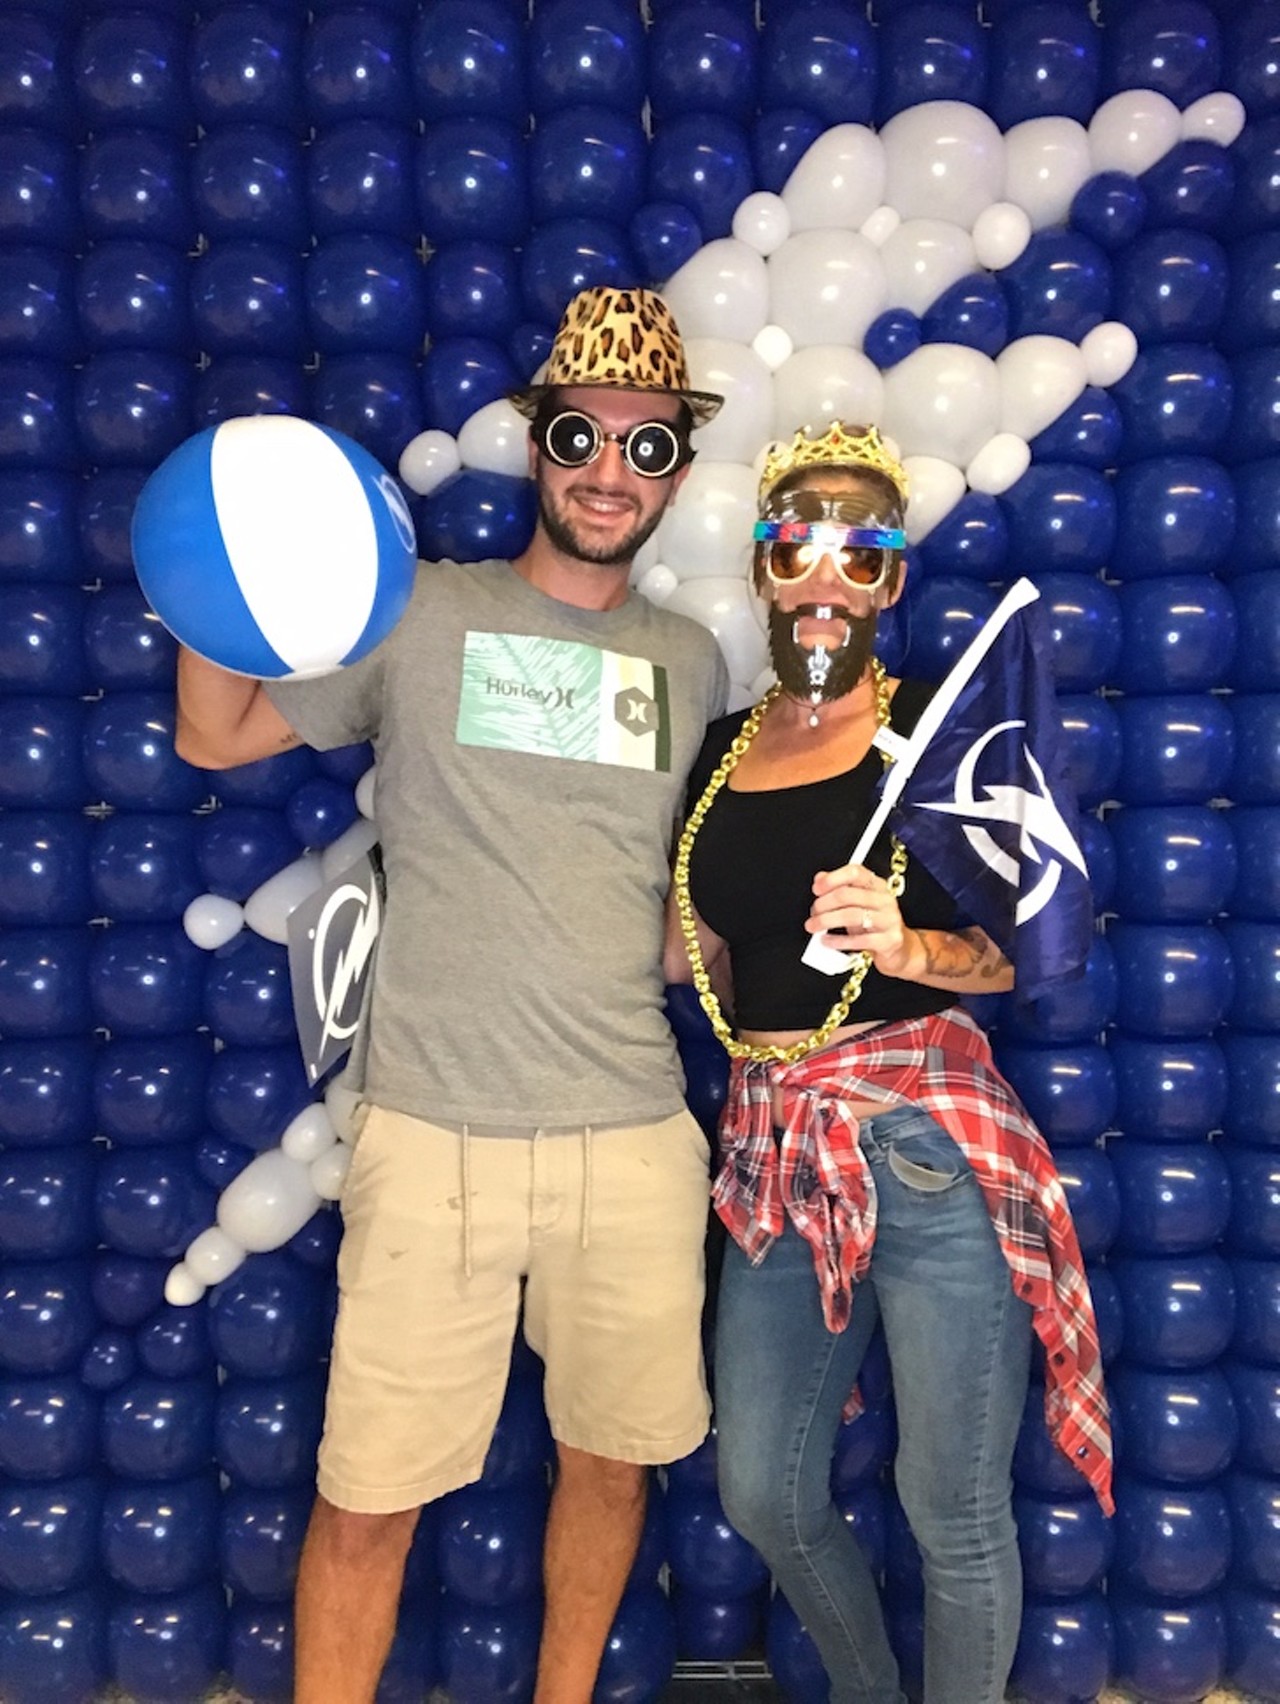 Photos from the 2019 Bolts Brew Fest photo booth